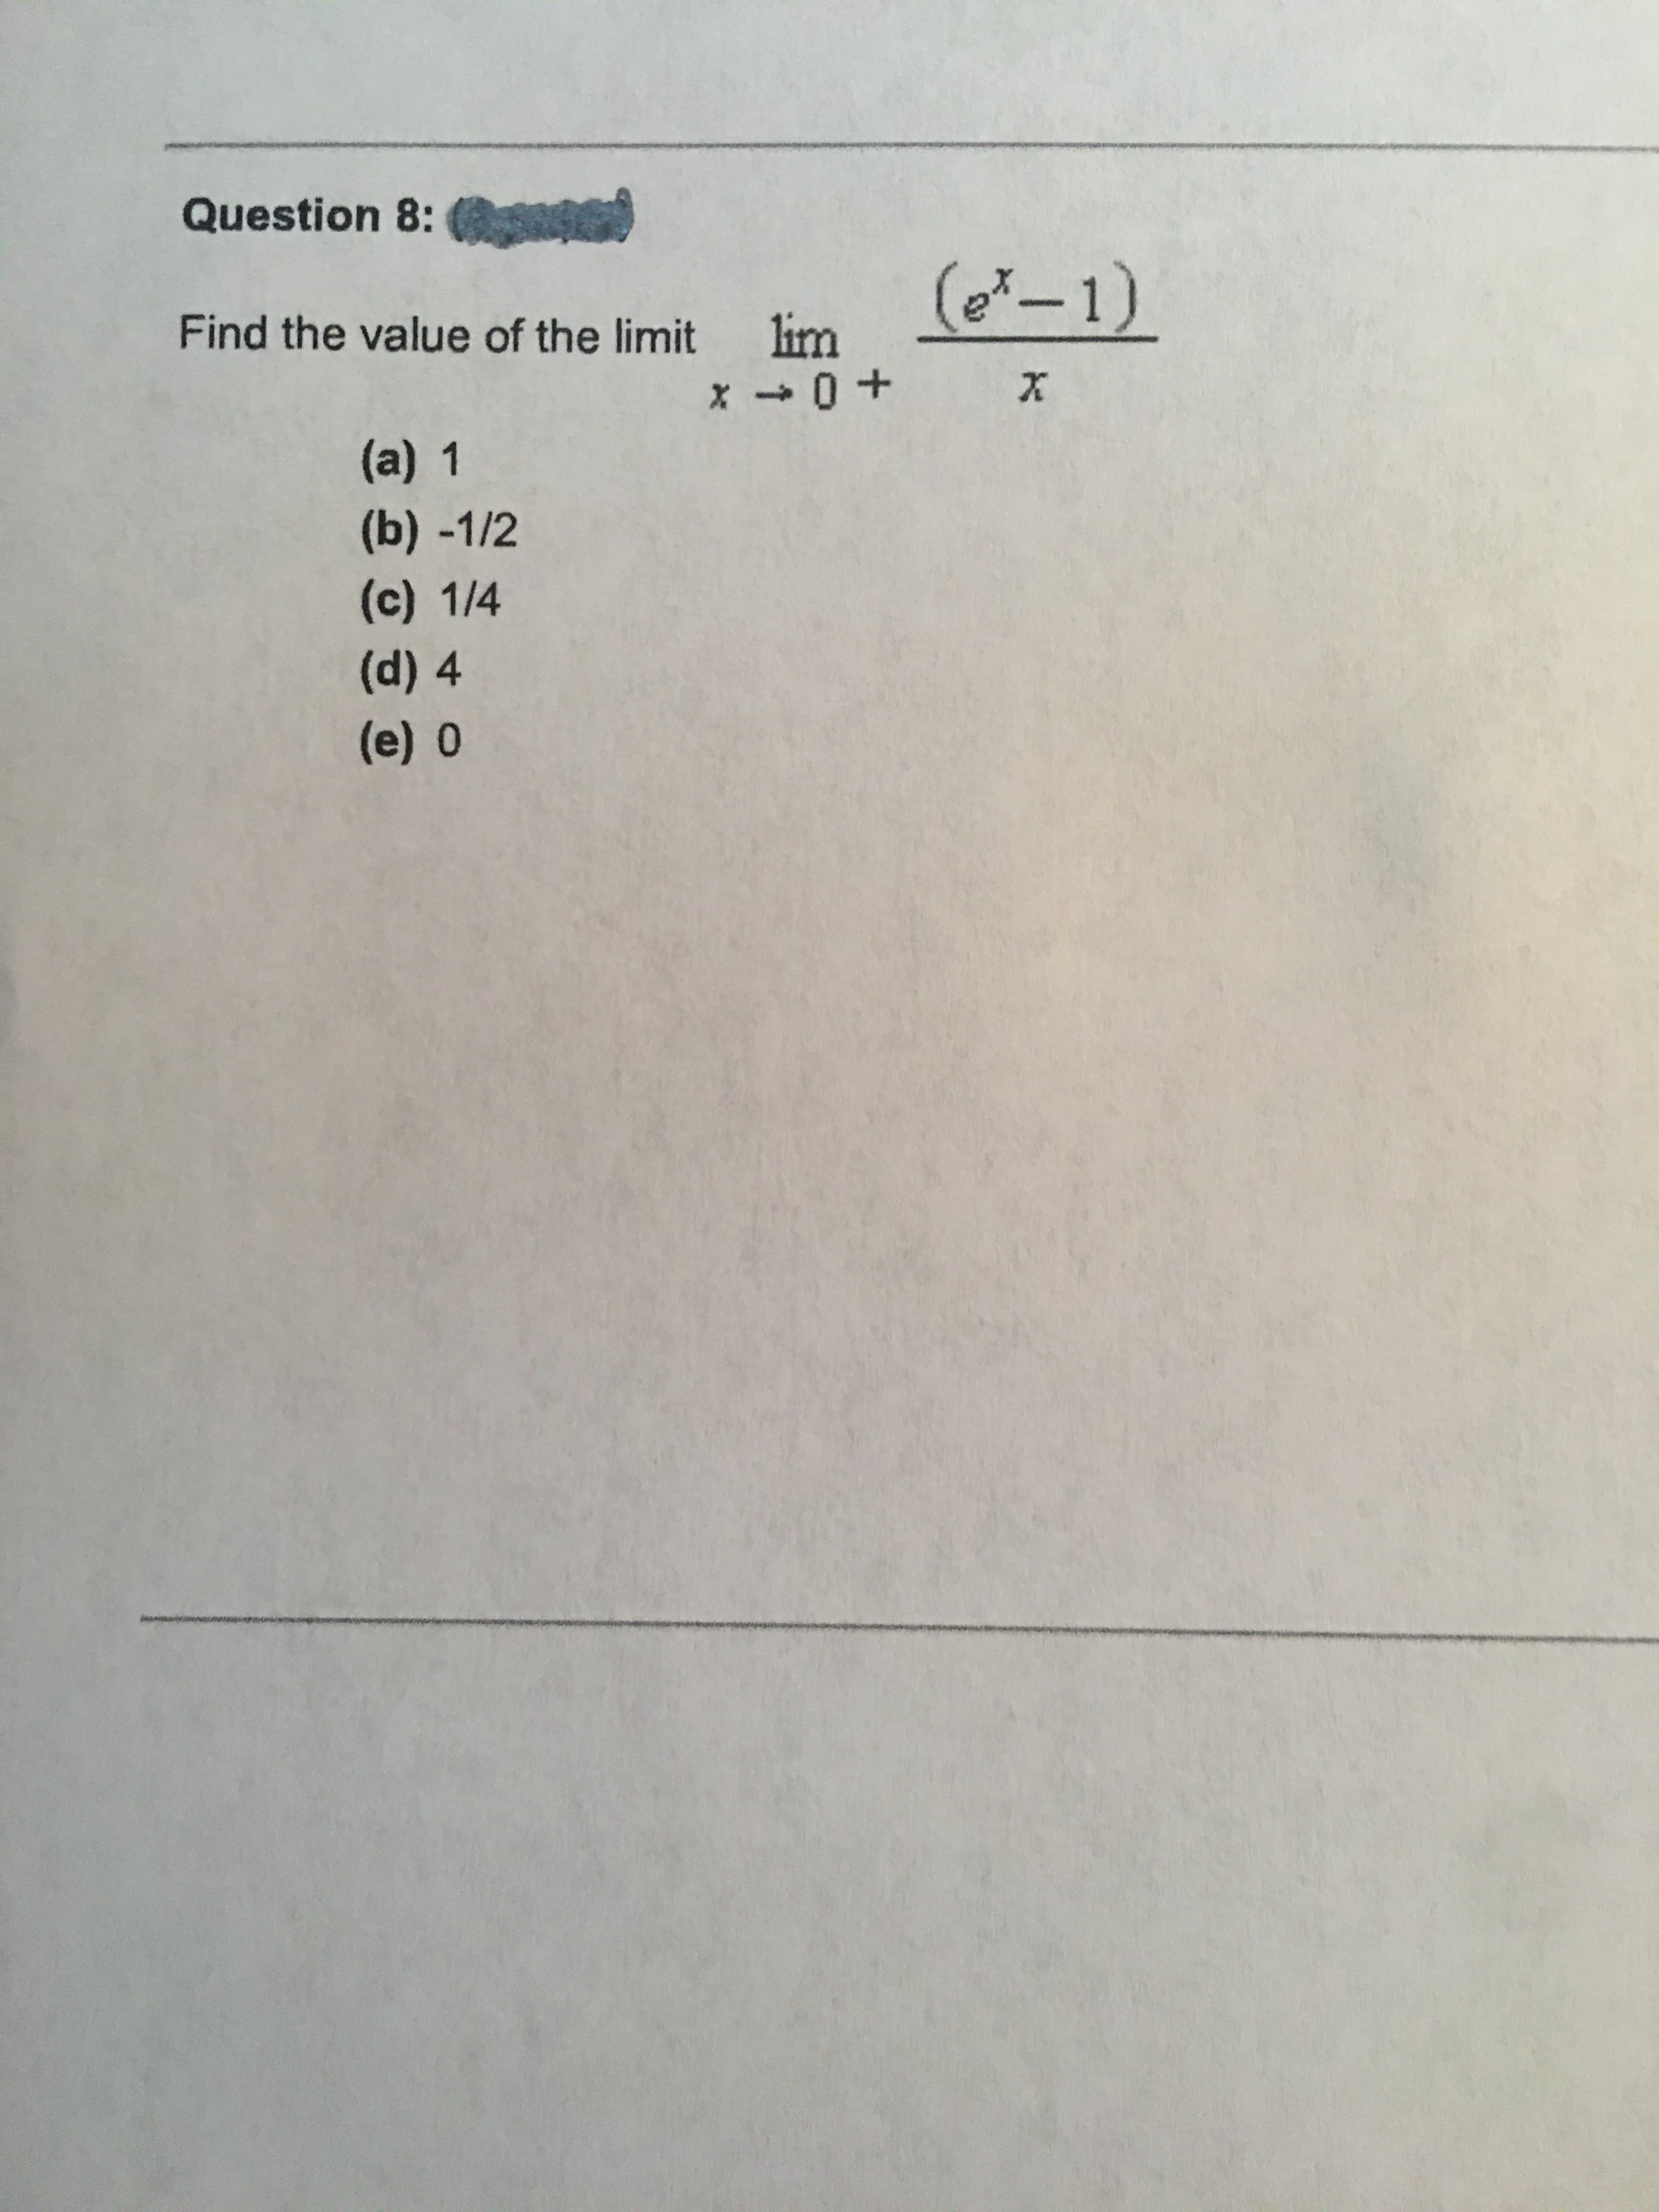 (e-1)
lim
x - 0+
Find the value of the limit
